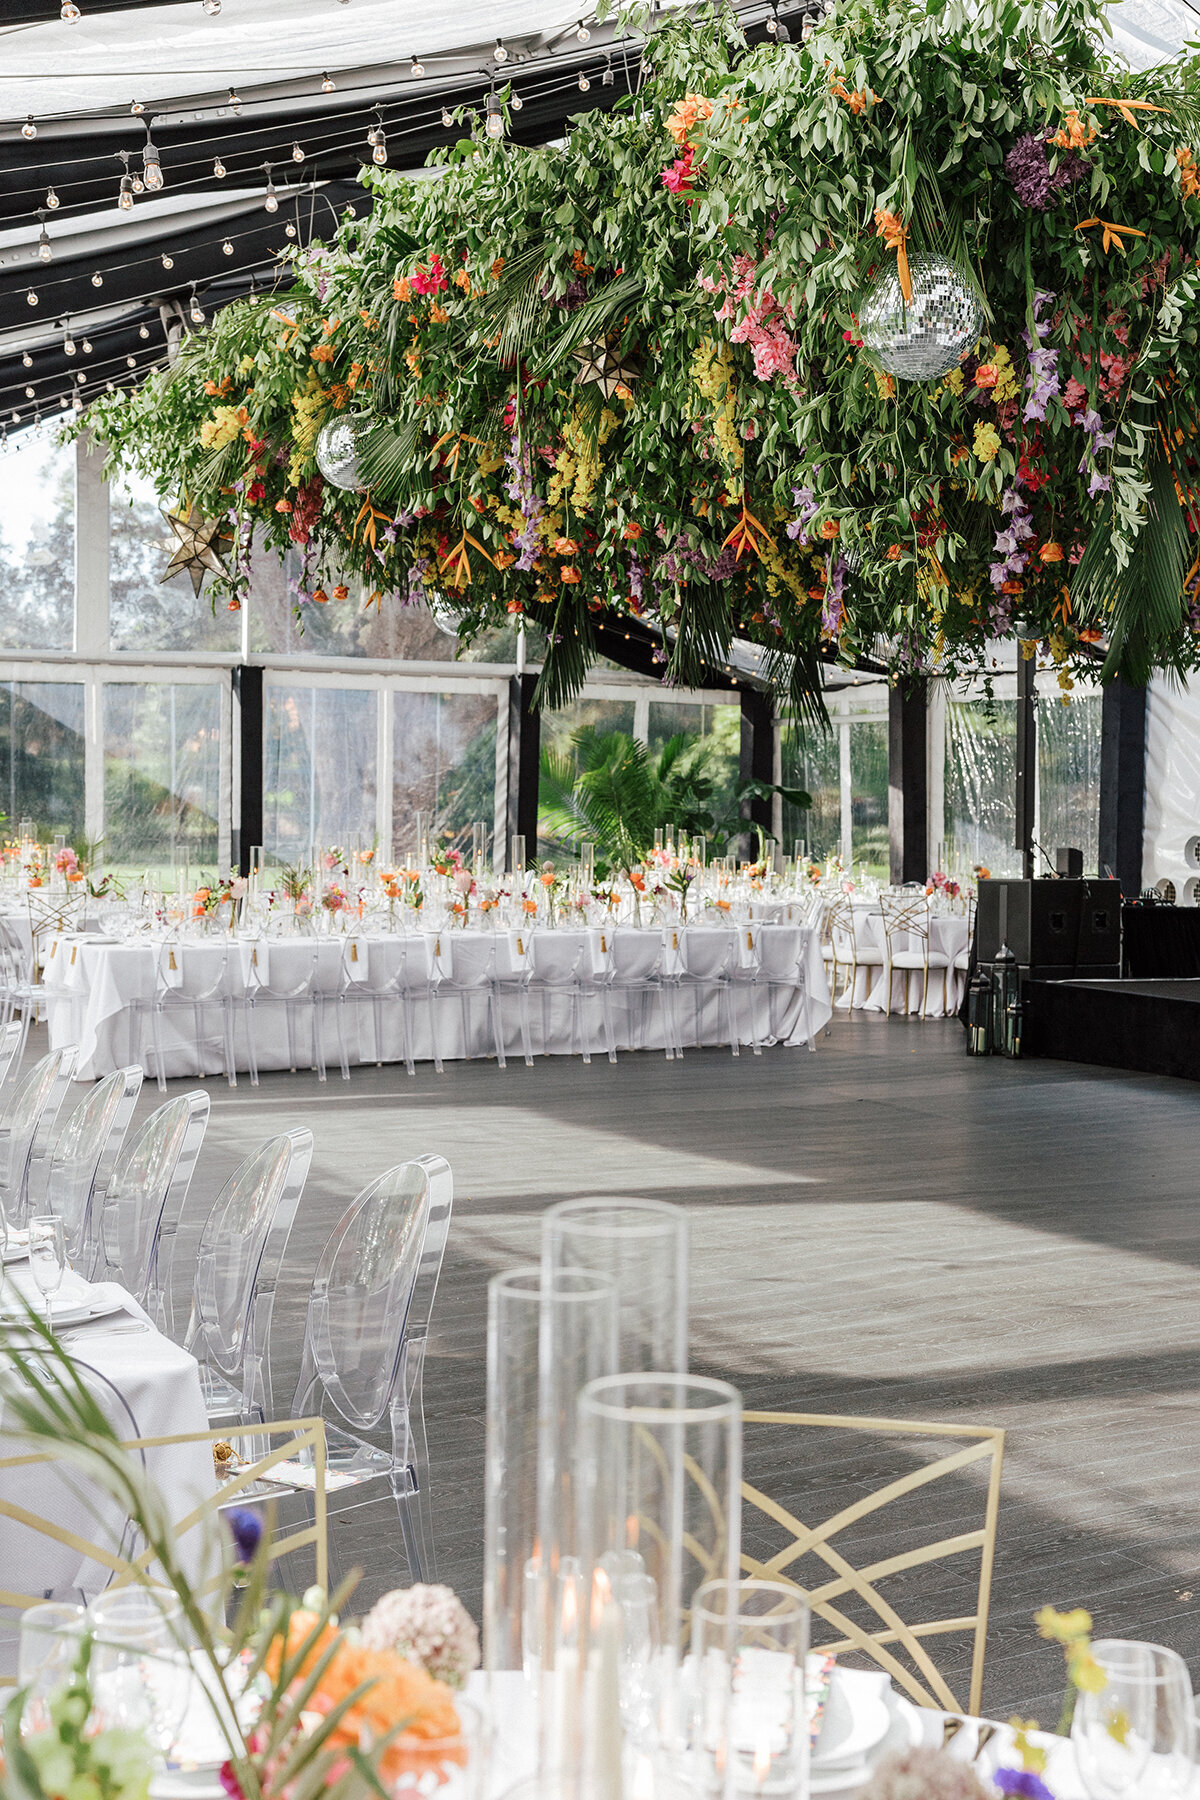 Sumner + Scott - New Orleans Museum of Art Wedding - Luxury Event Planning by Michelle Norwood - 28